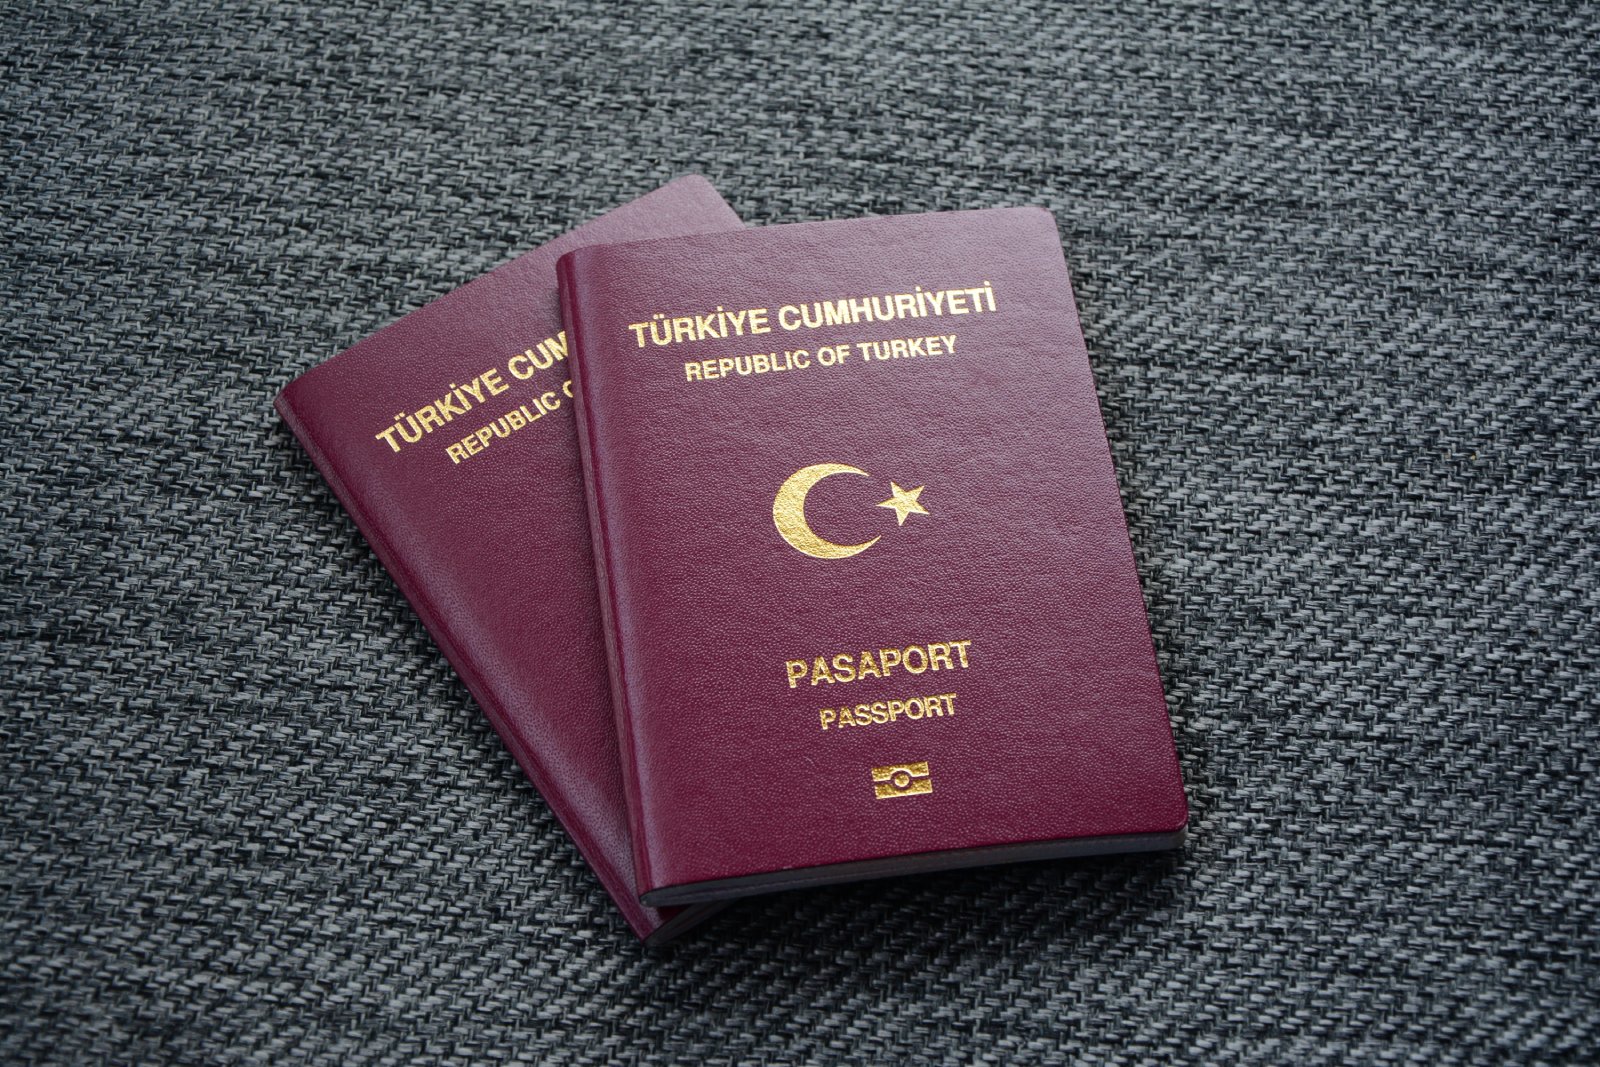 <p><span>The most popular visa route for Americans in Turkey is the short-term residence visa, which allows foreigners to stay in the country for up to a year for “tourist purposes”, amongst other criteria. </span></p>